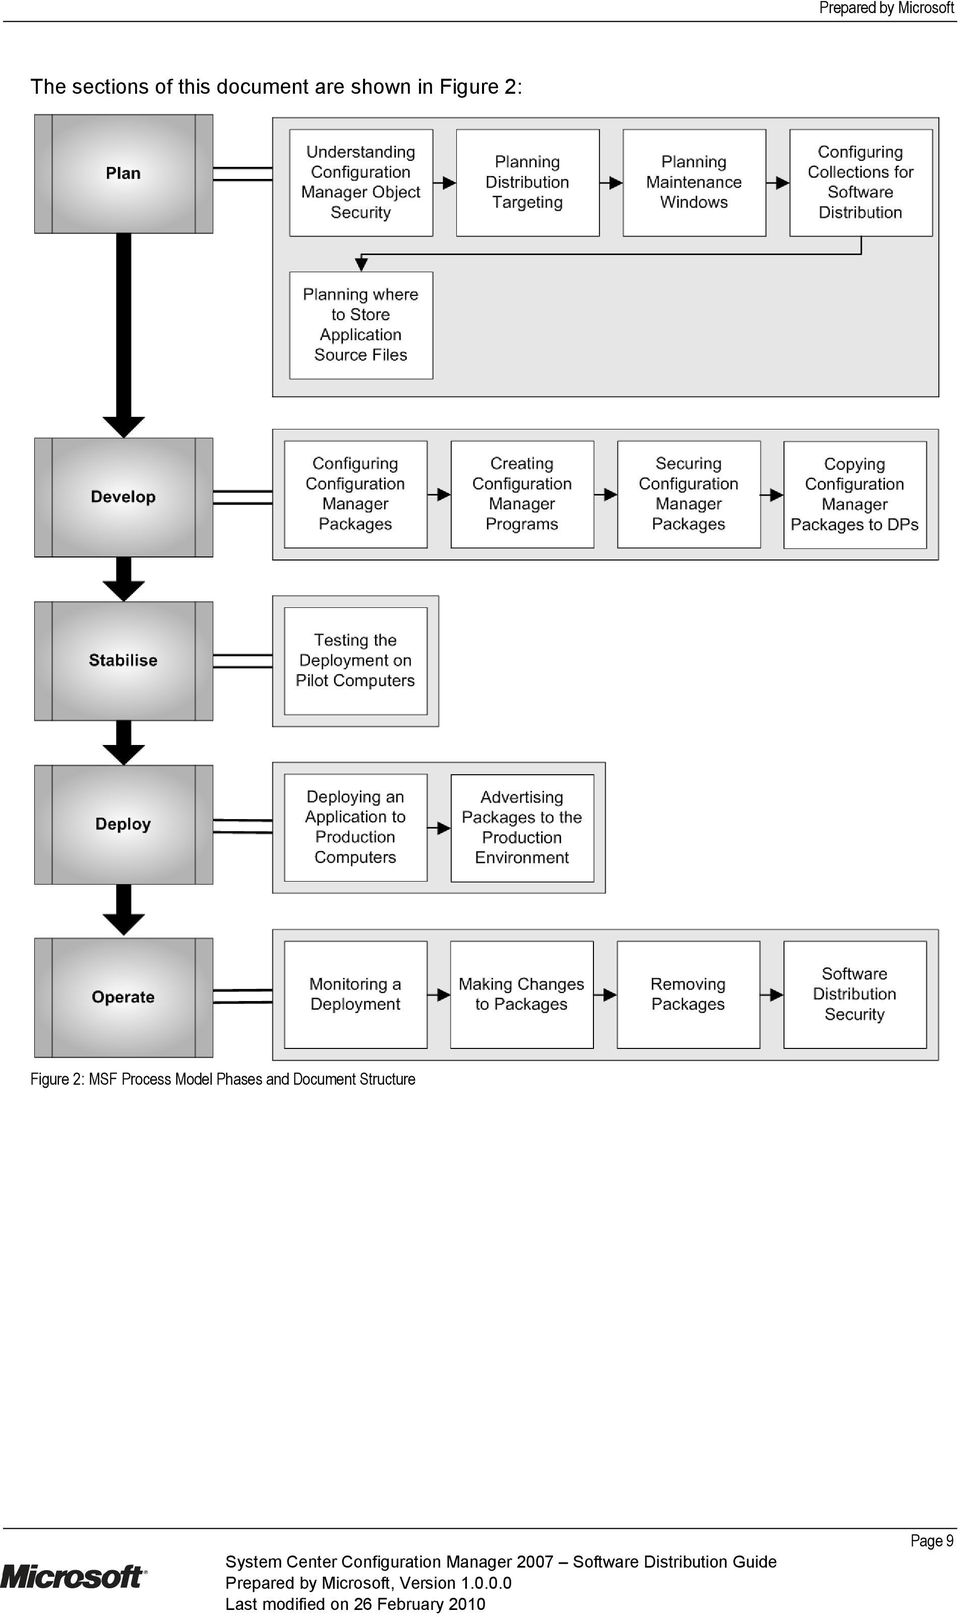 2: MSF Process Model Phases